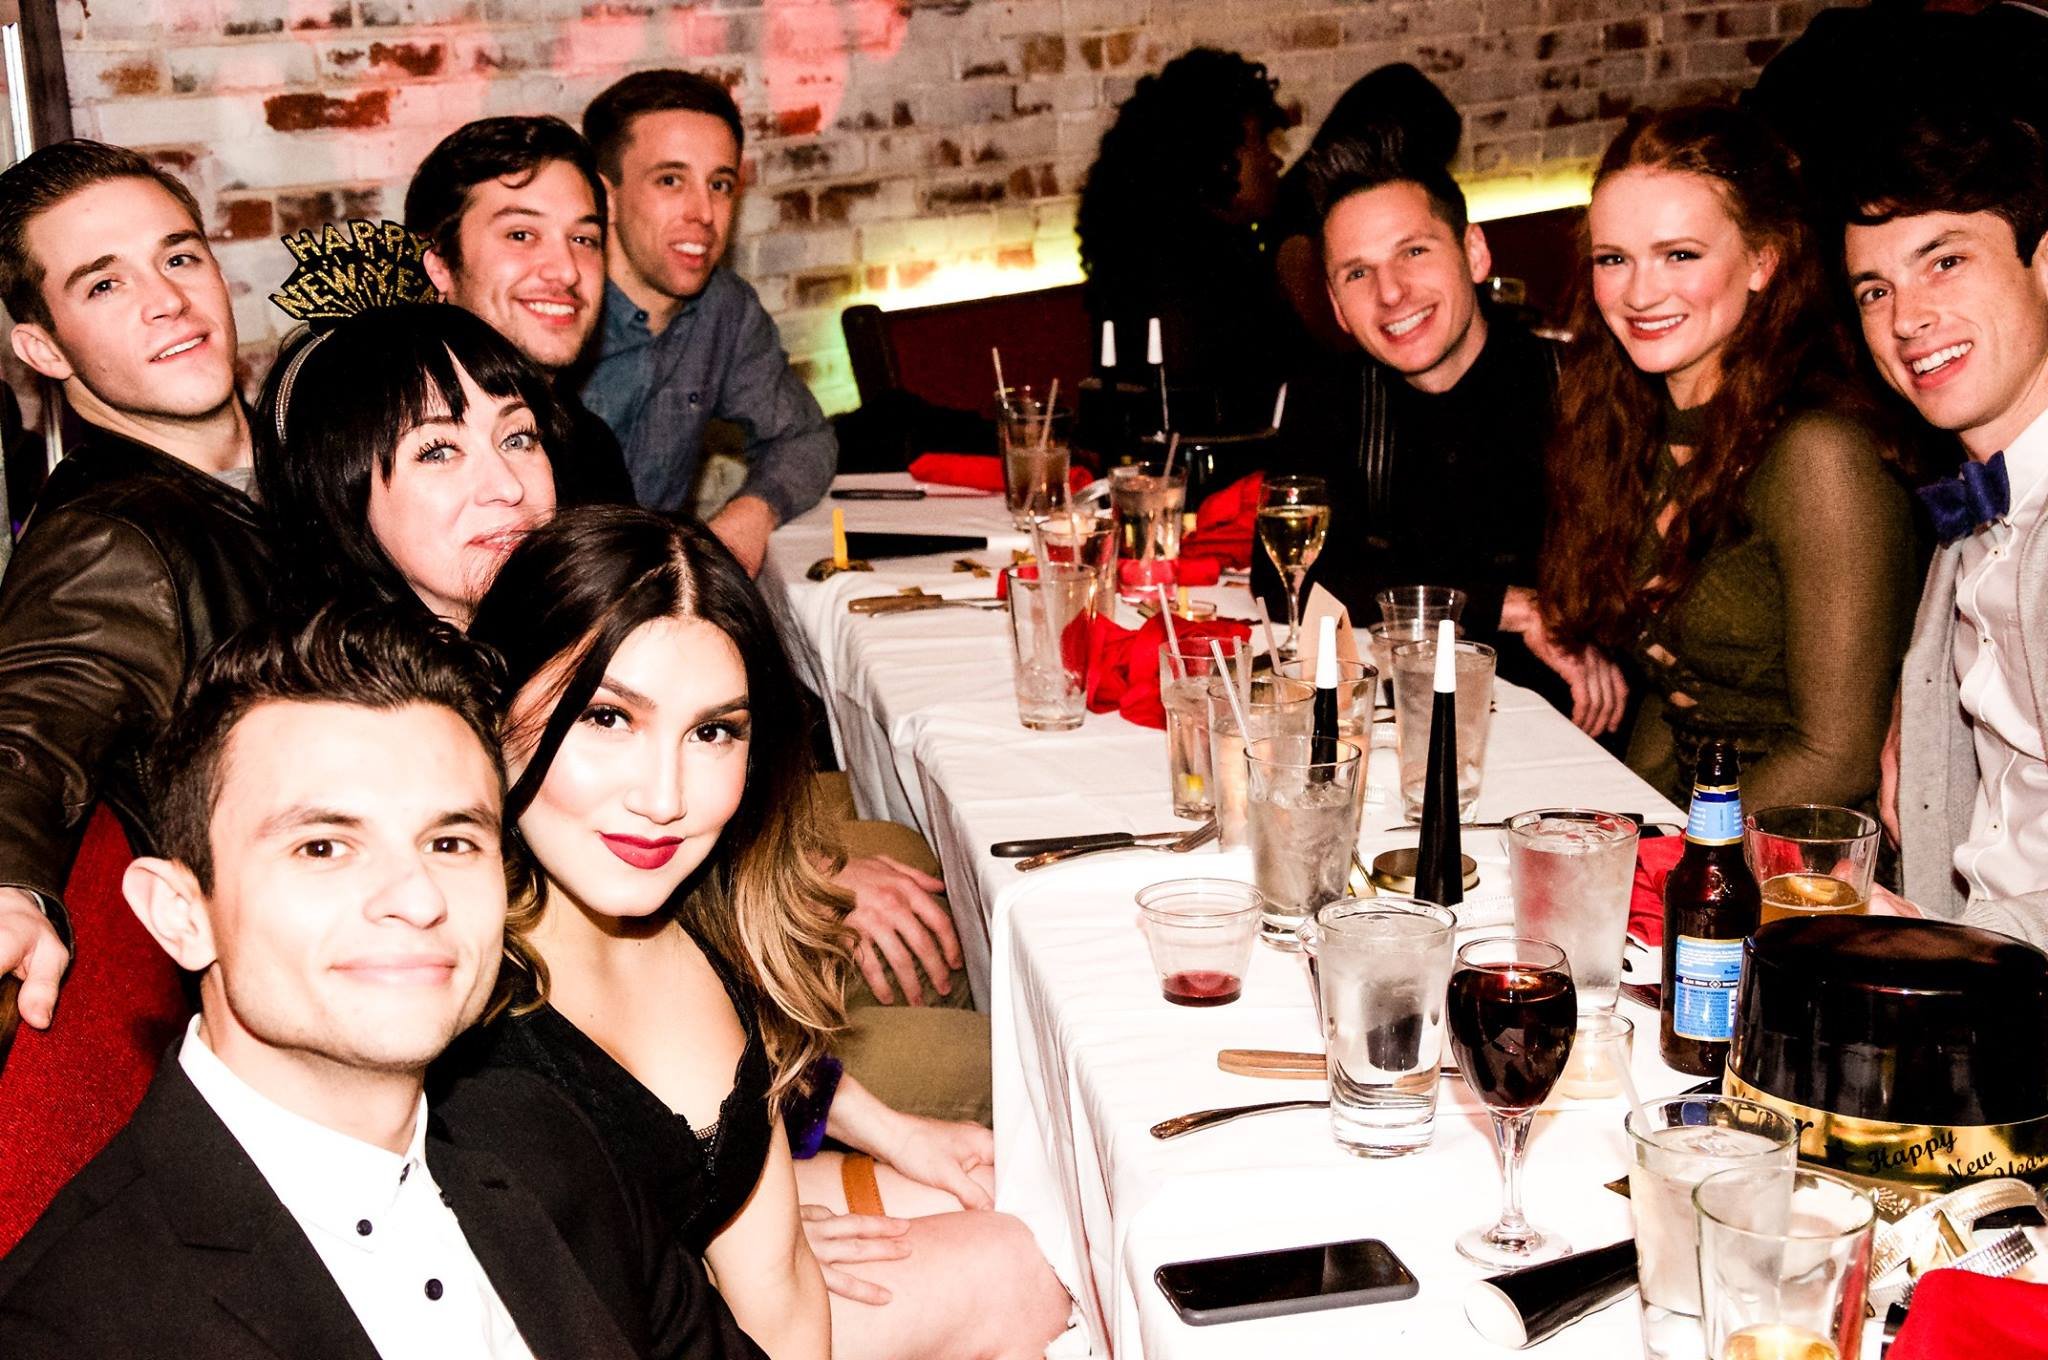 wicked cast at tabel.jpg